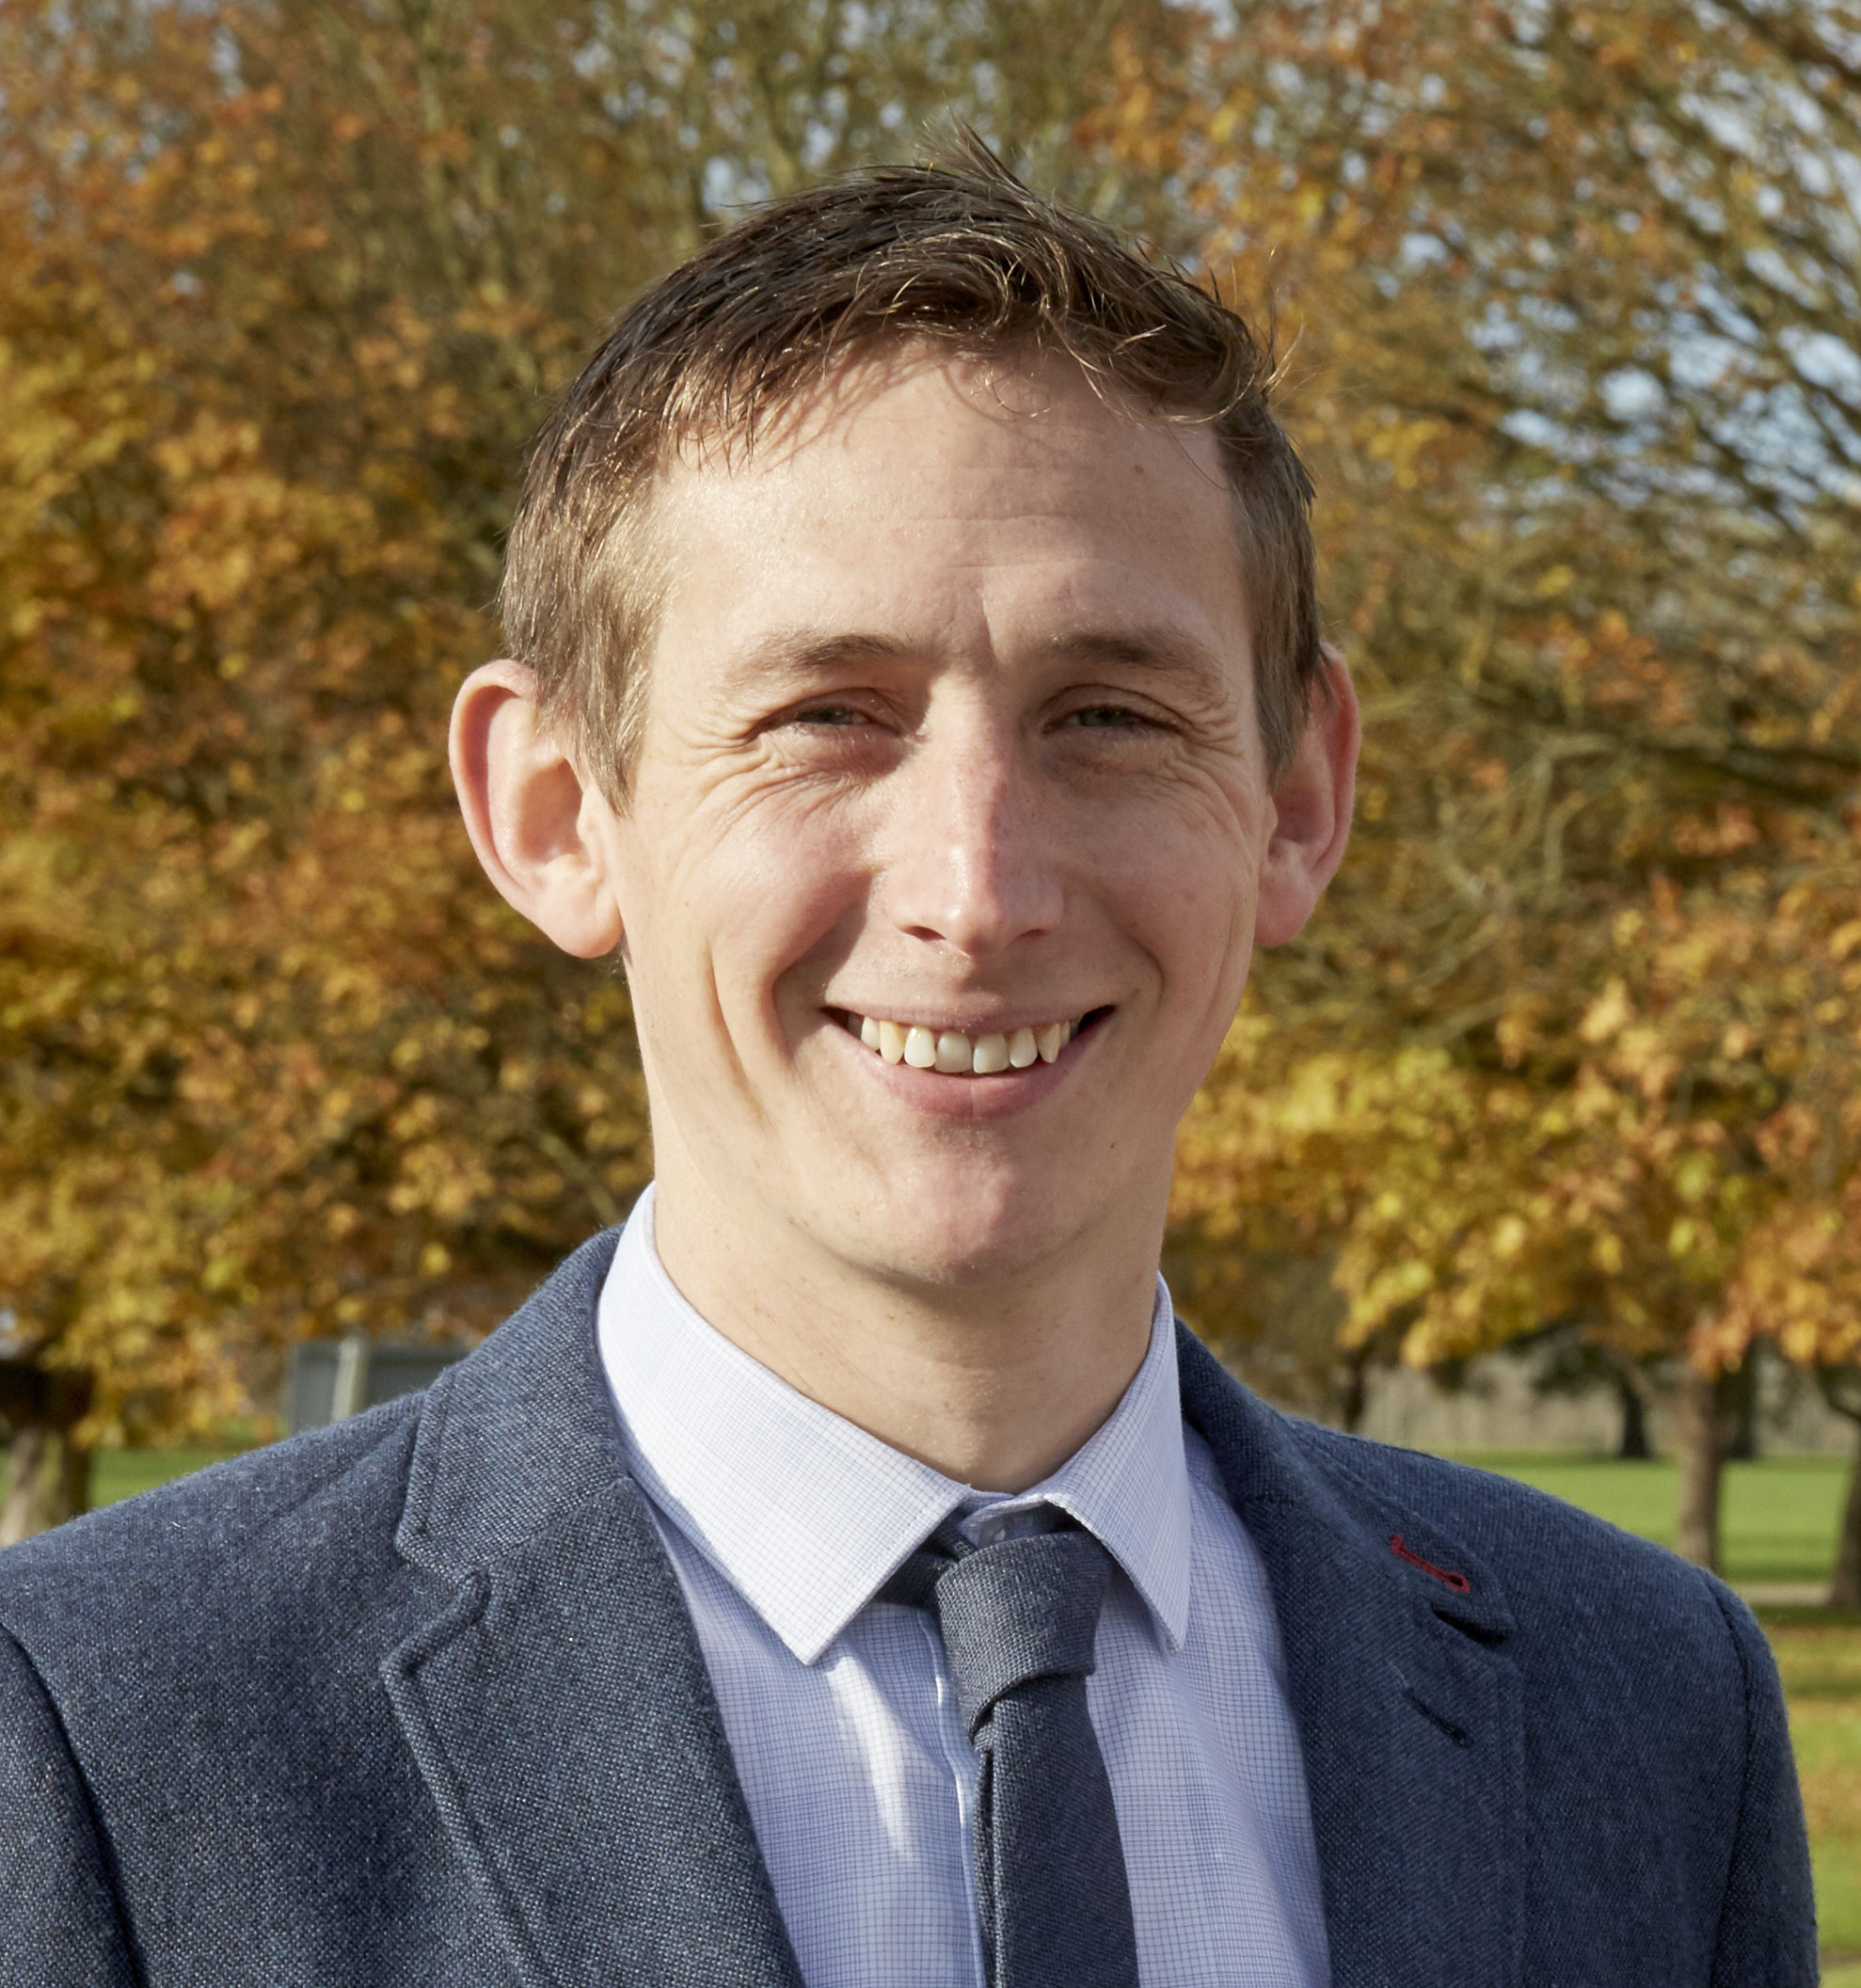 James has over a decade of experience in odour sampling and odour control methods